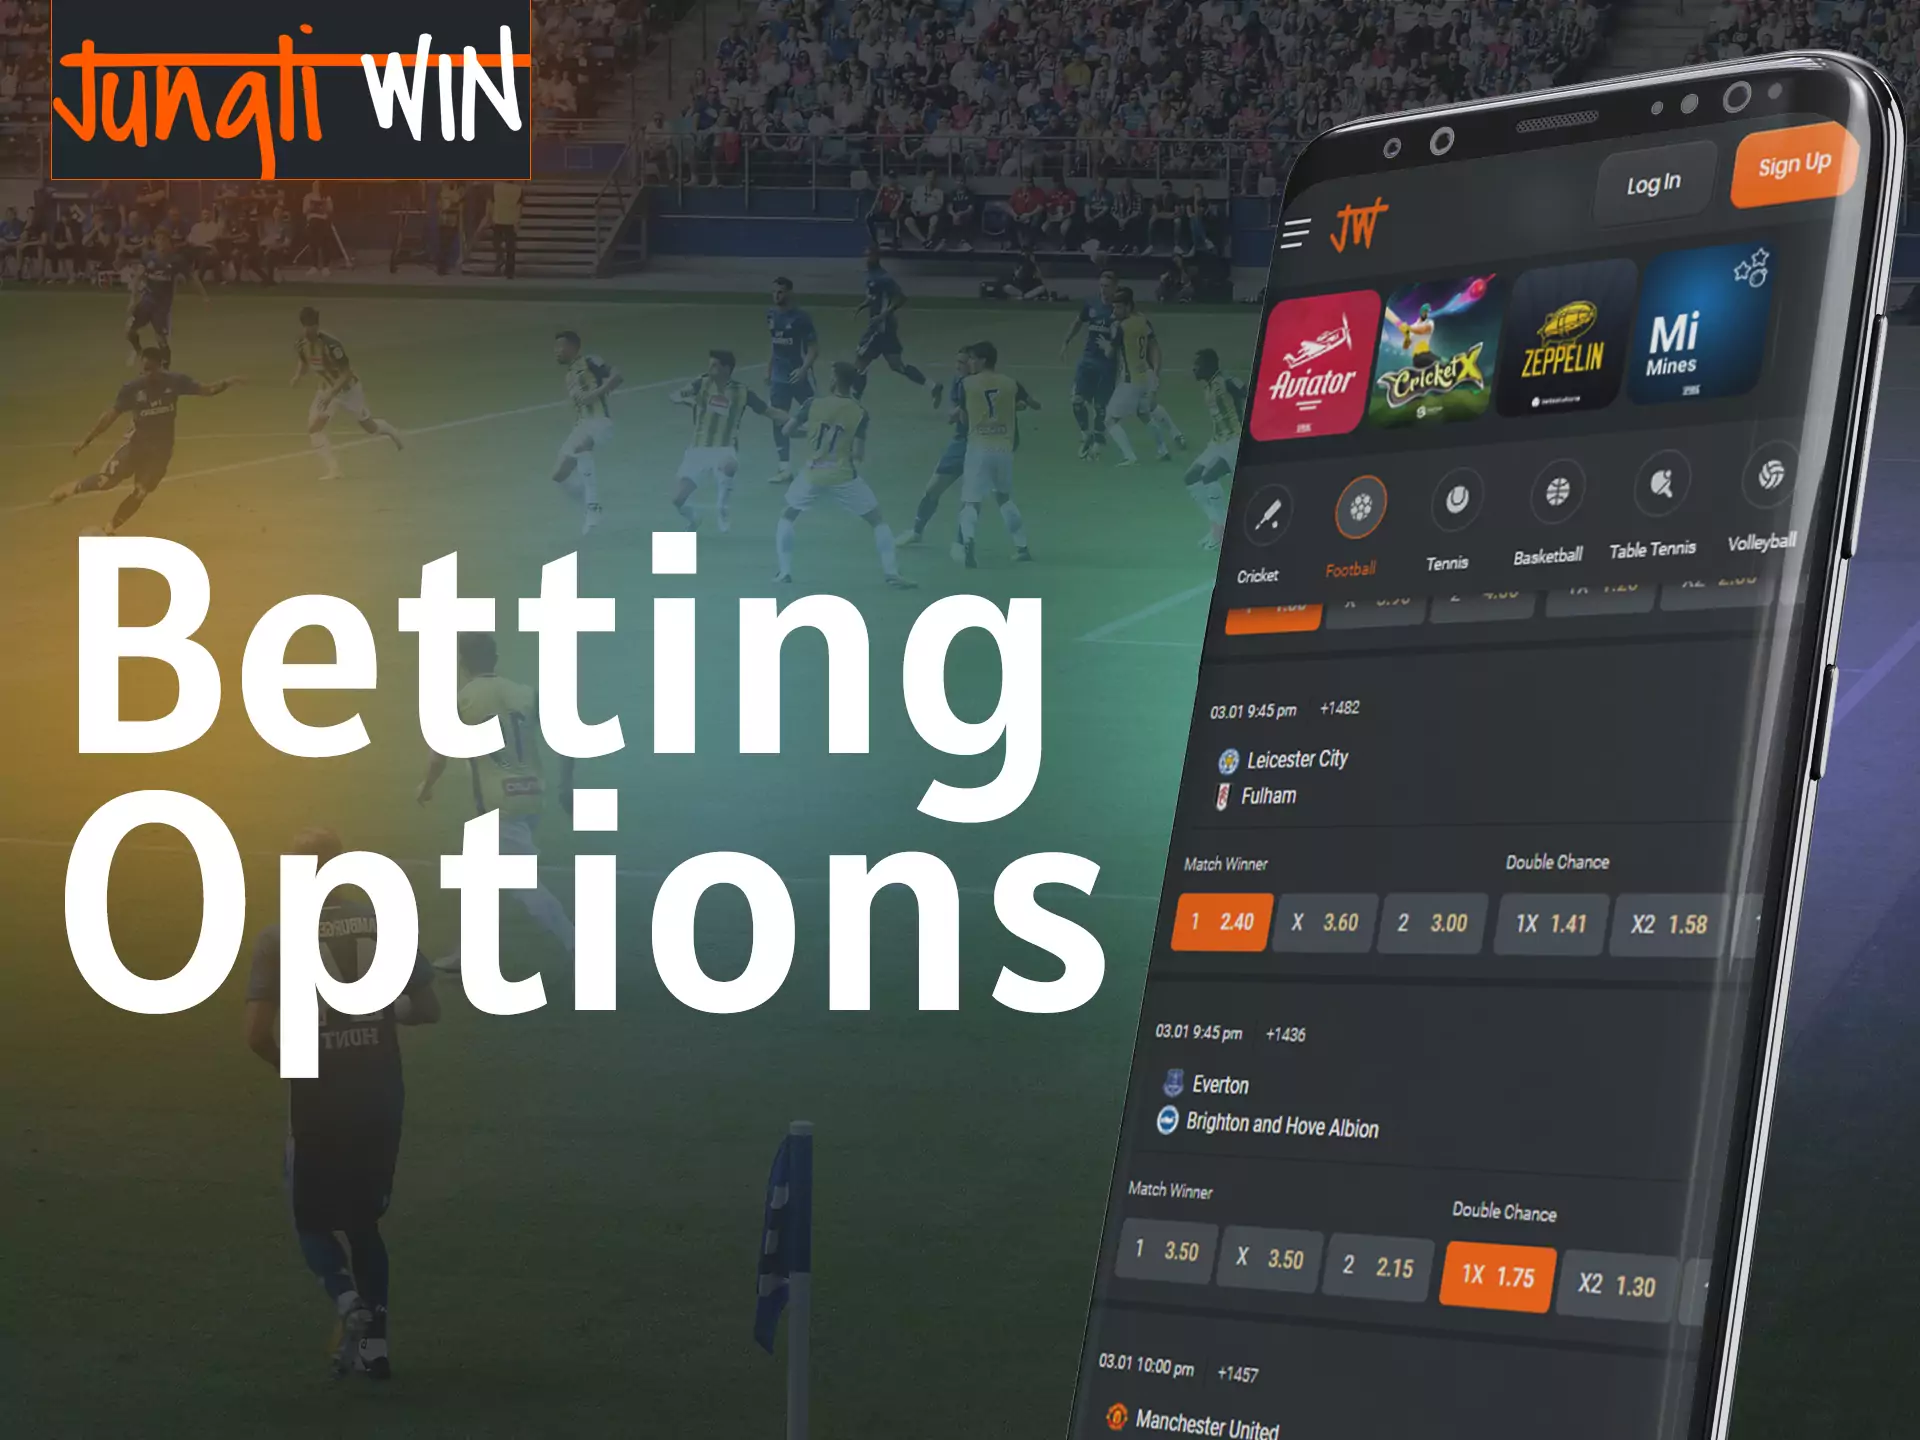 Jungliwin has various options for betting on any sporting event.